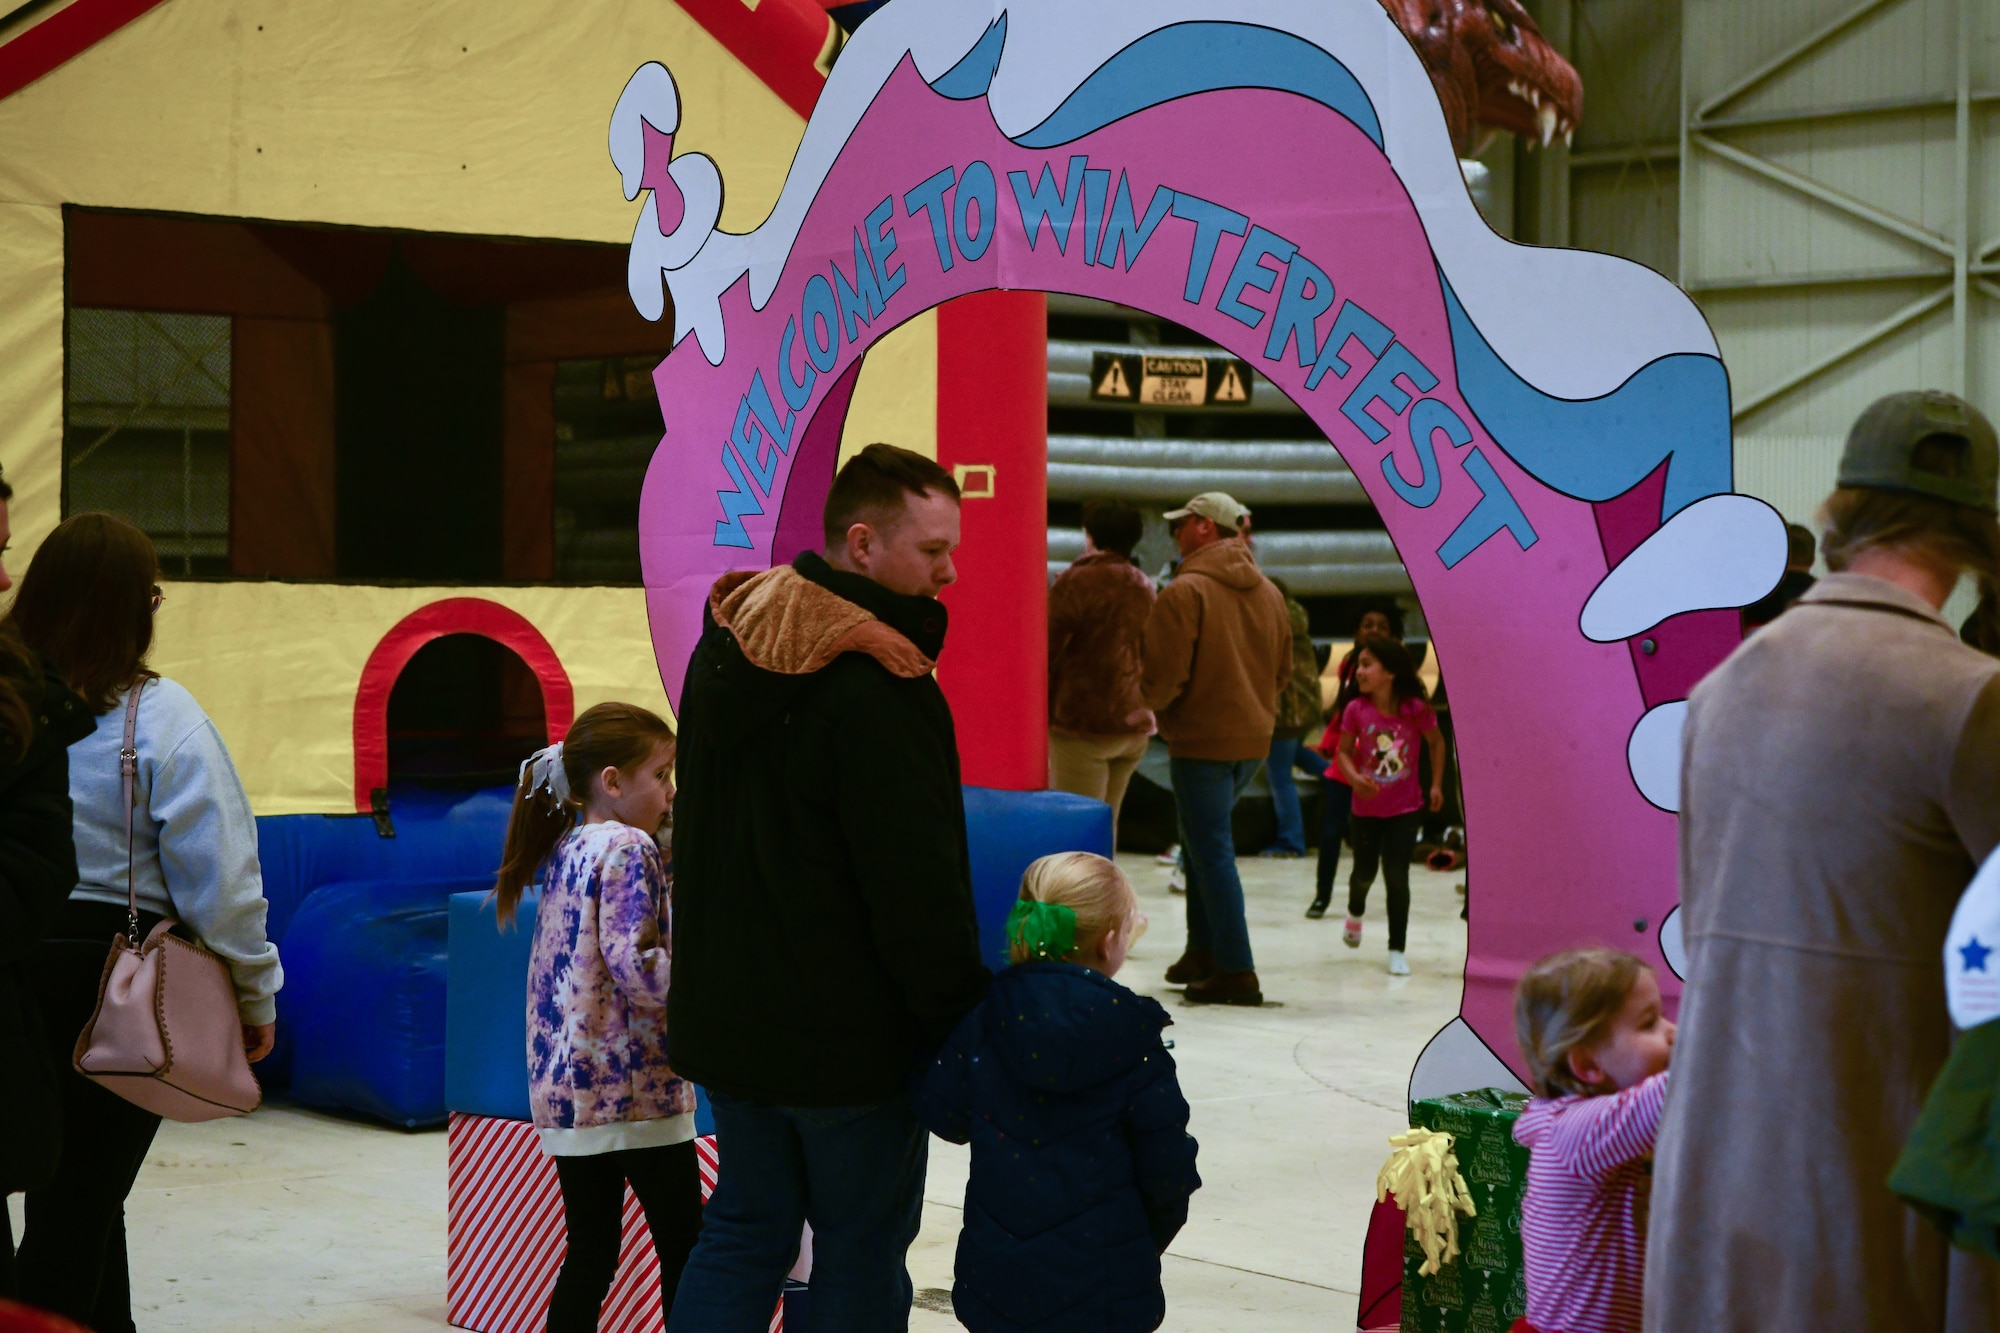 Families enter the Winterfest on the flightline at Beale Air Force Base, Calif. on Dec. 17, 2022.